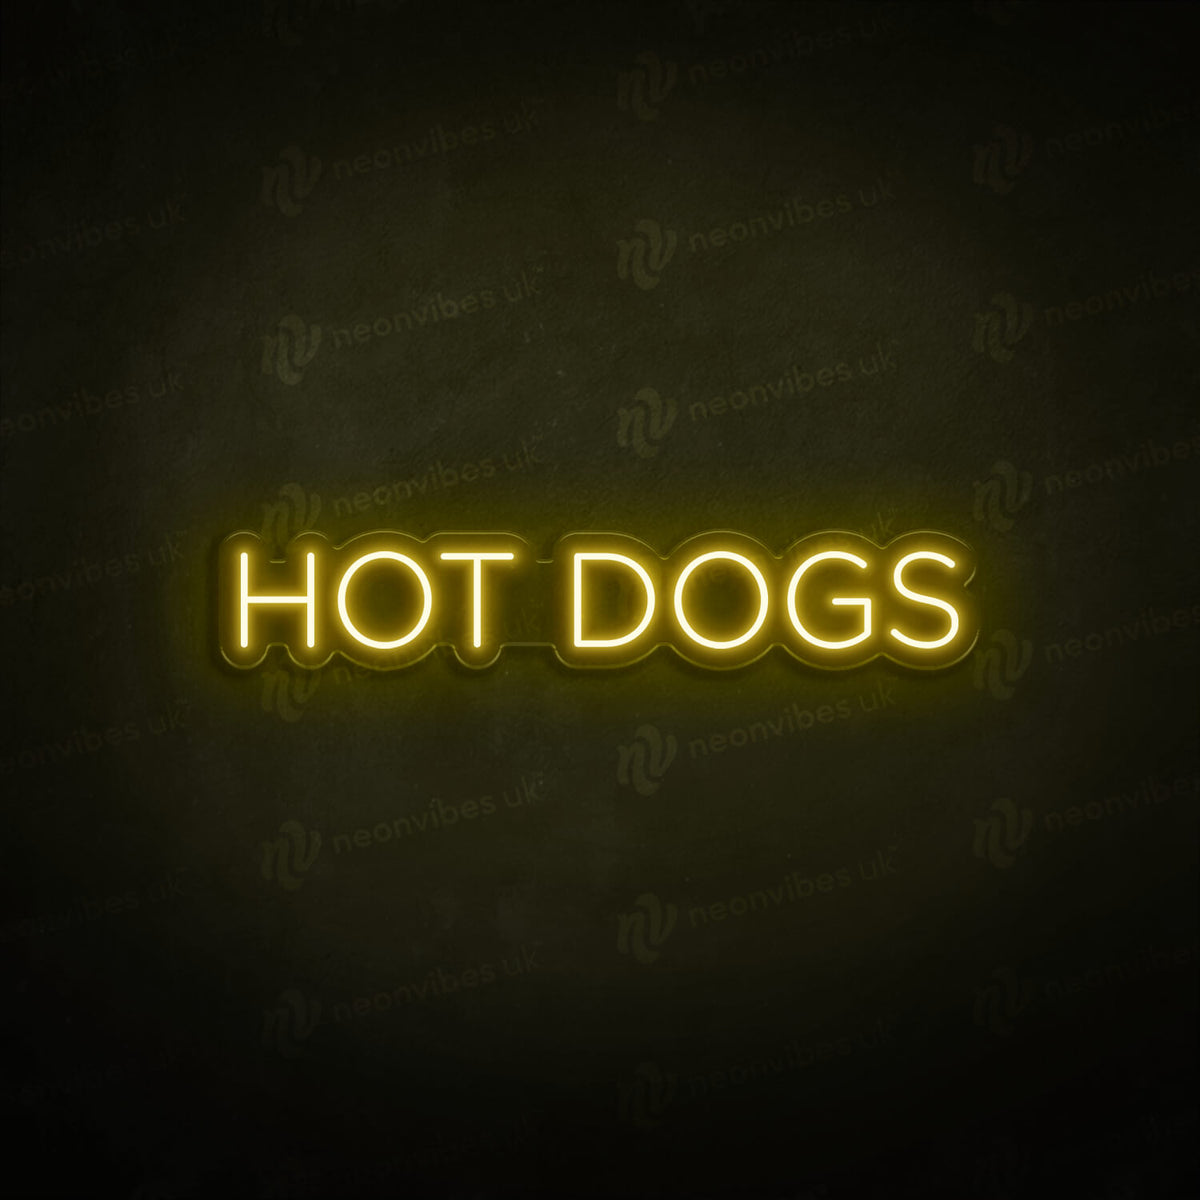 Hot Dogs neon sign